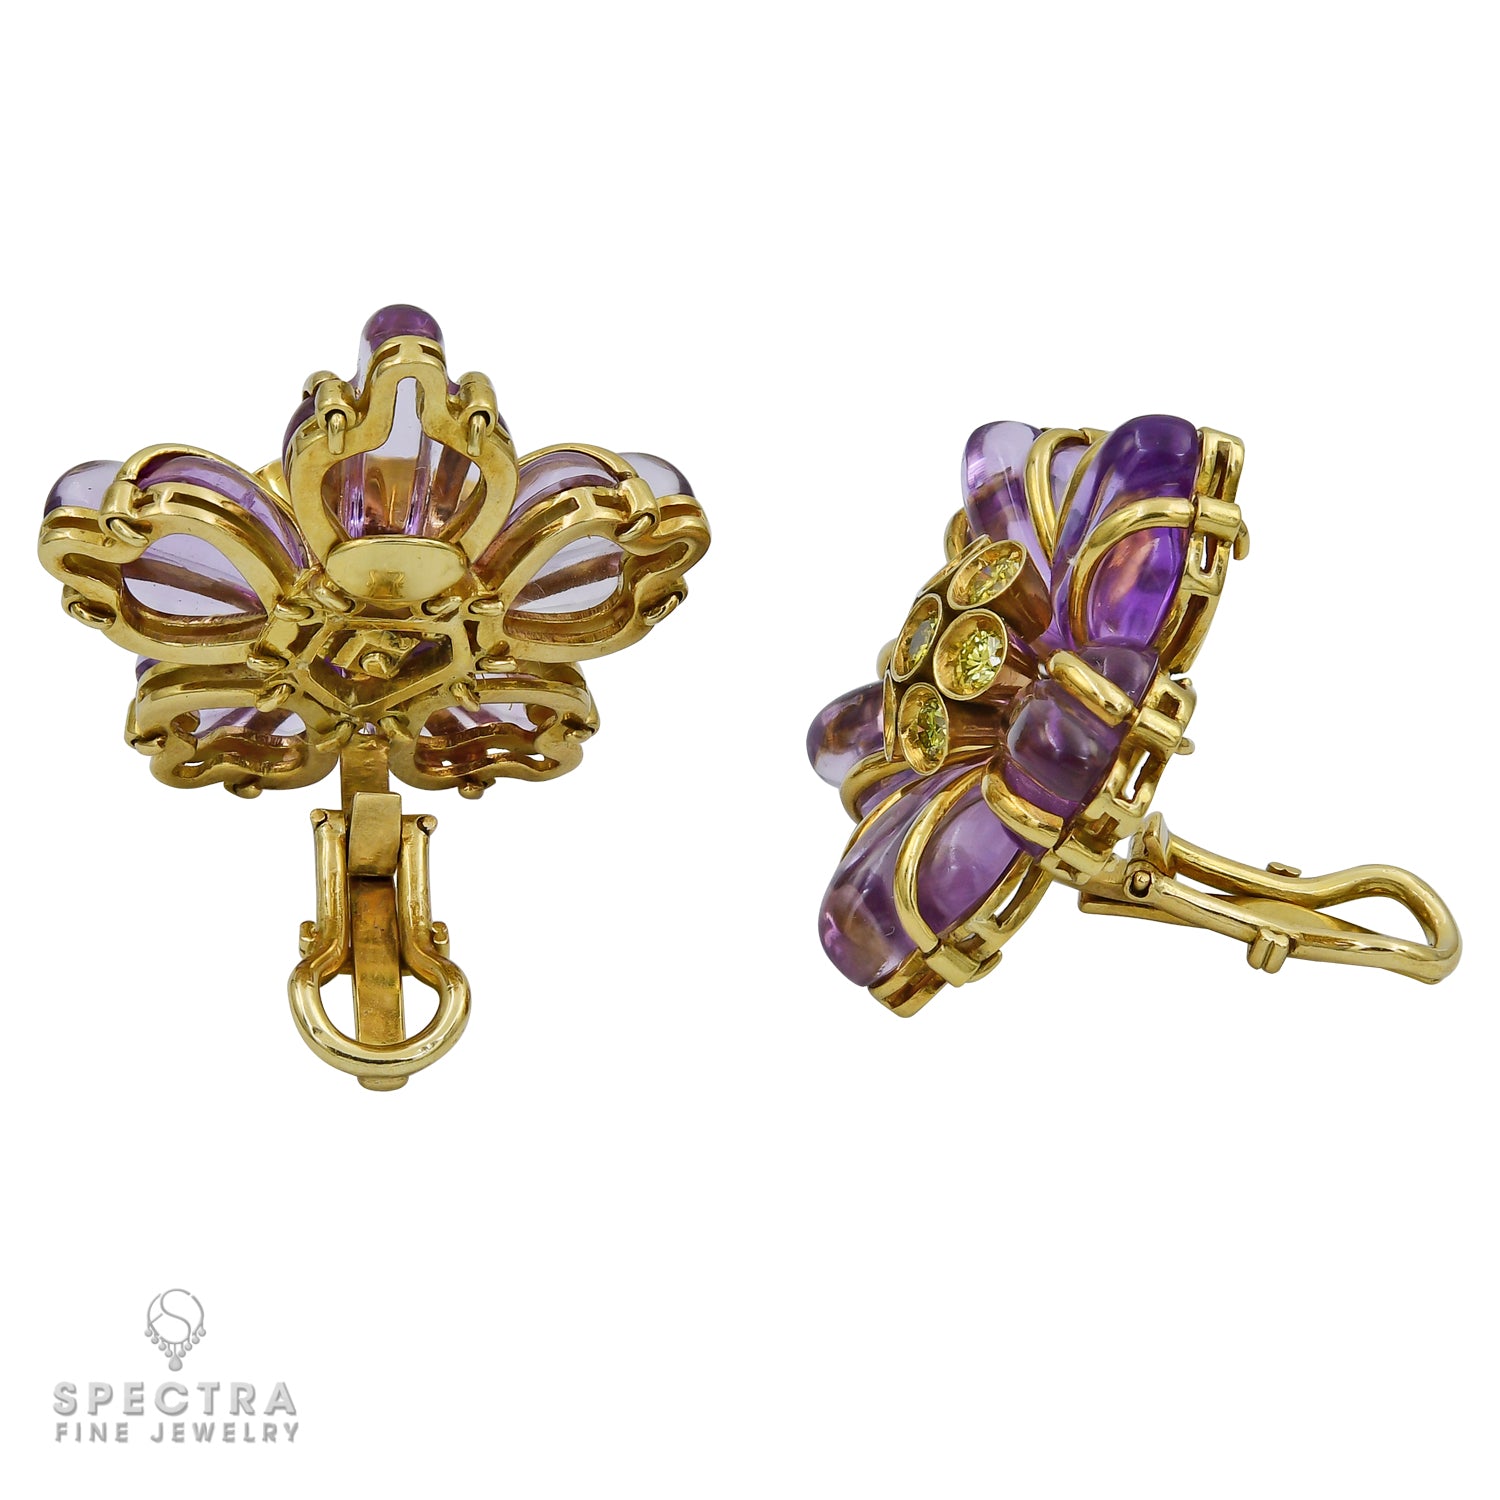 Exquisite Amethyst and Diamond Flower Pendant and Earrings Set in 18k Yellow Gold